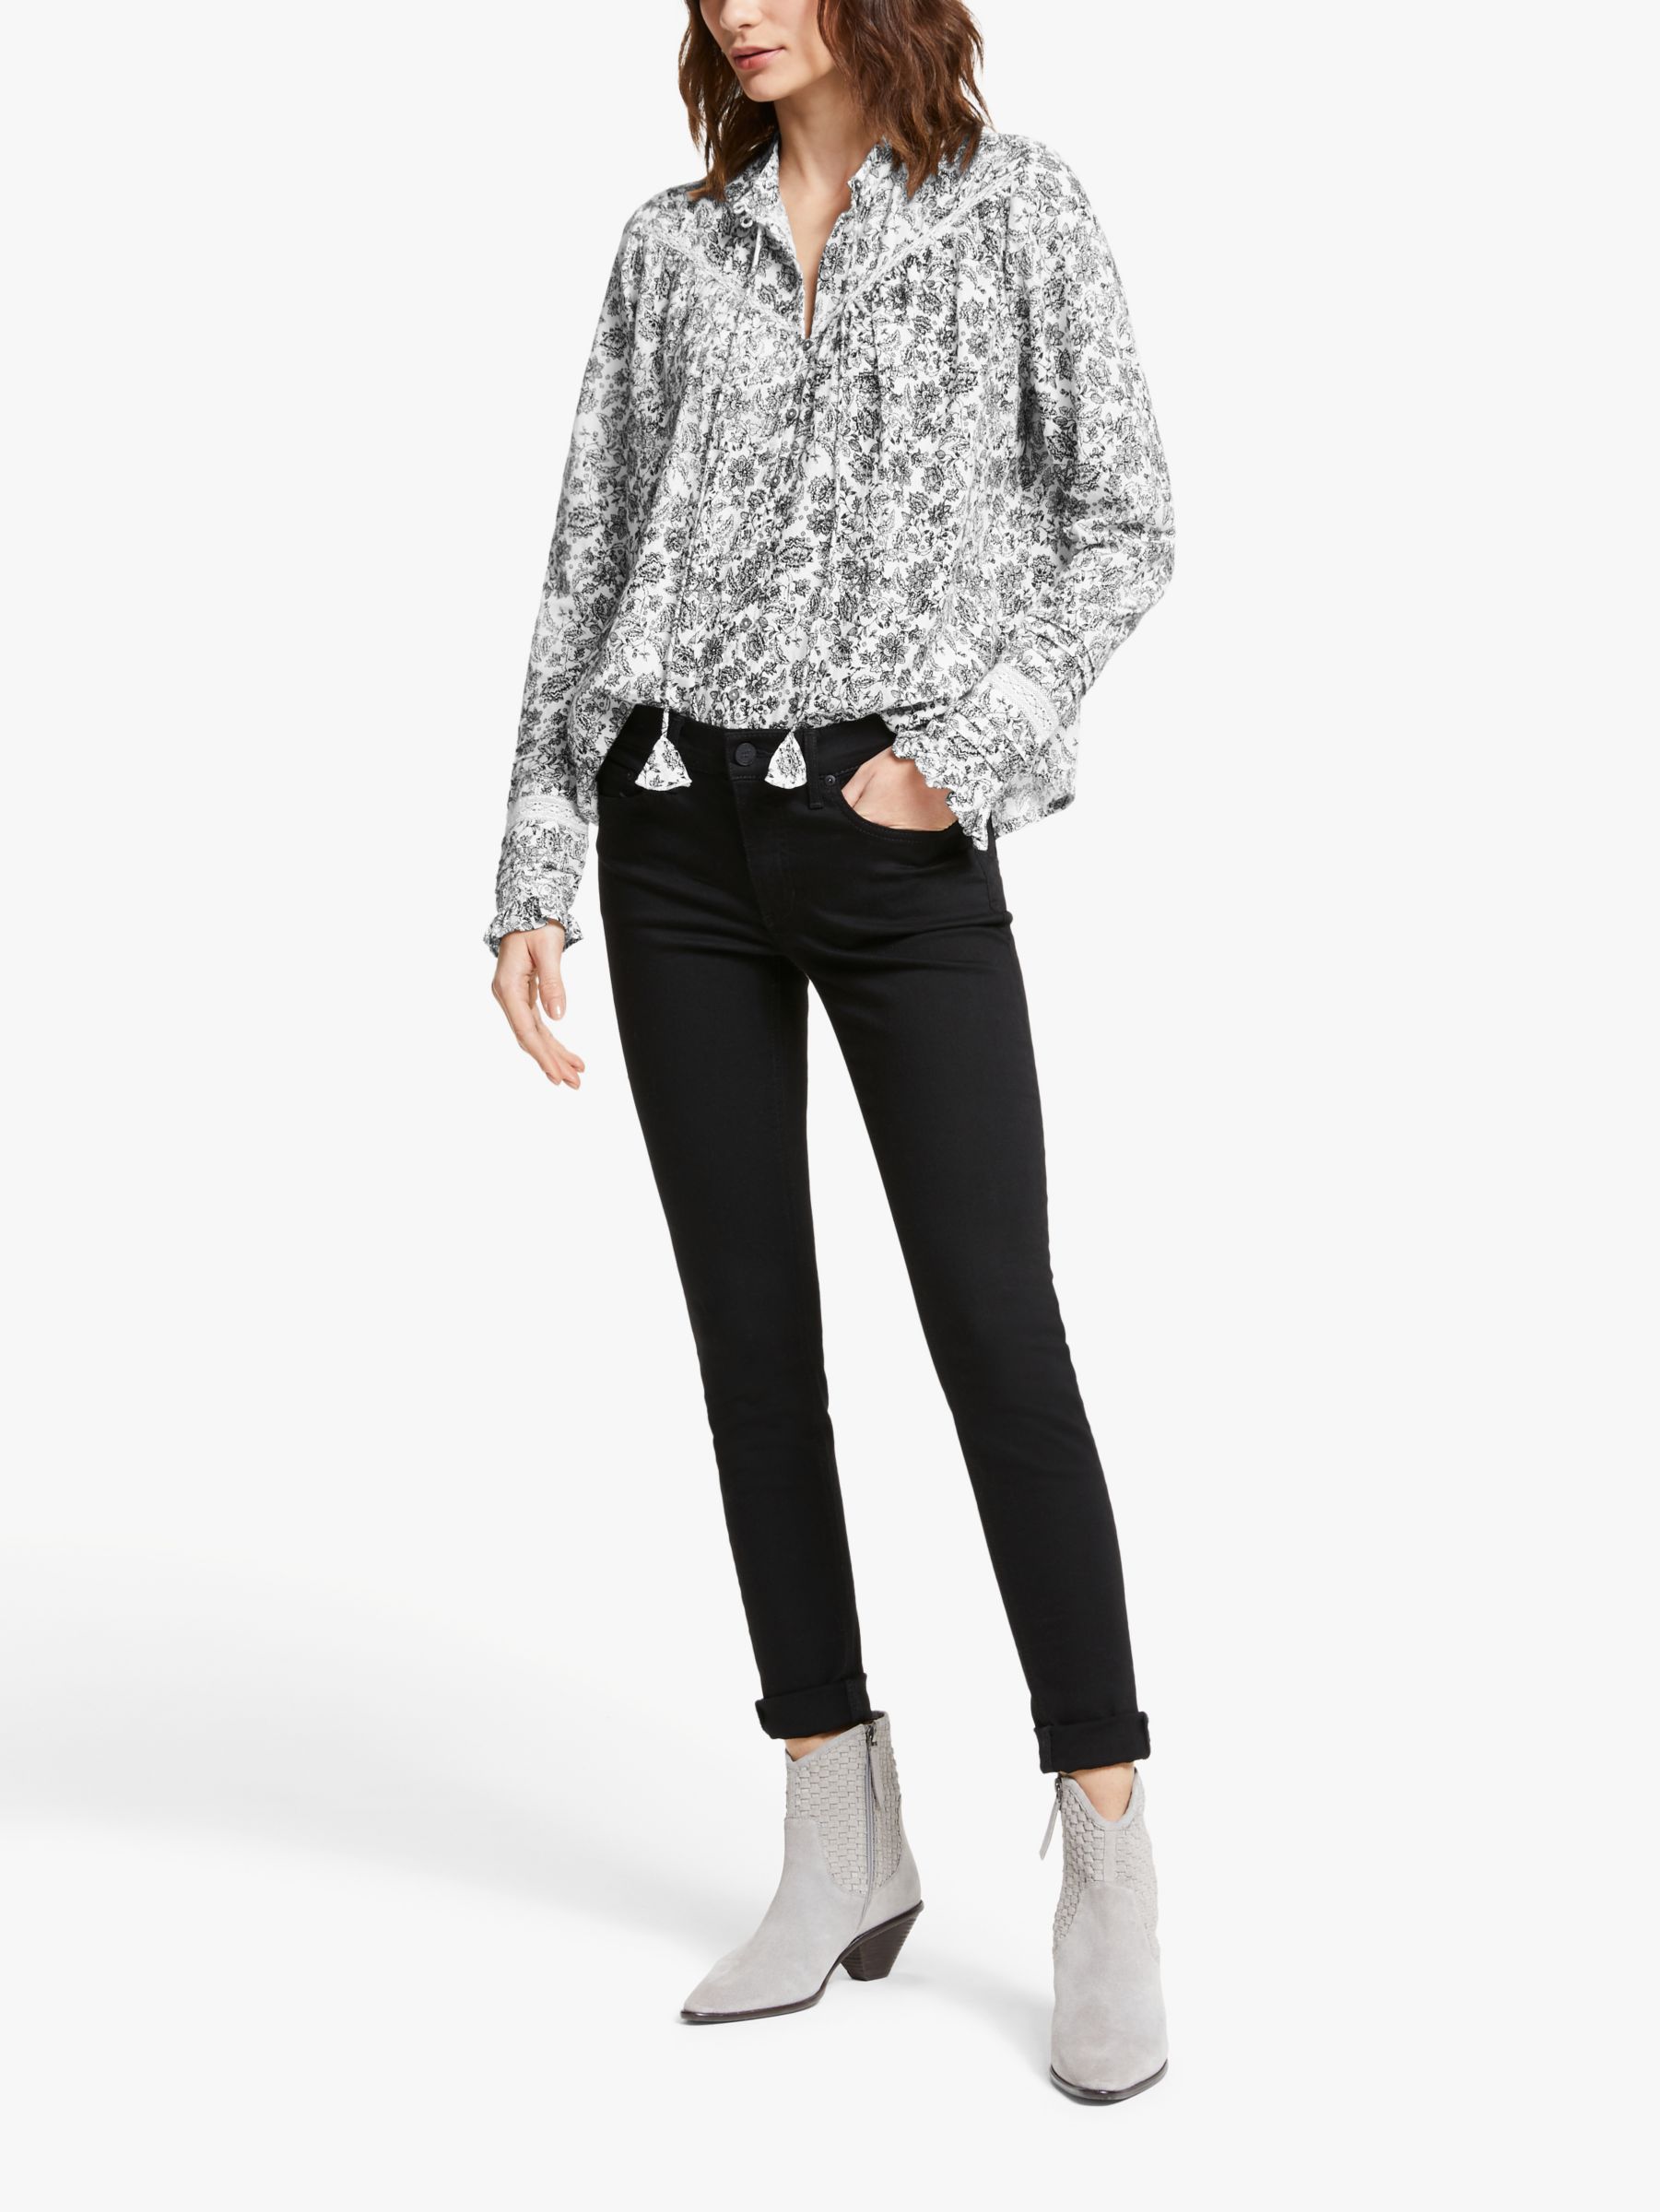 AND/OR Nelly Batik Floral Blouse, Black/White